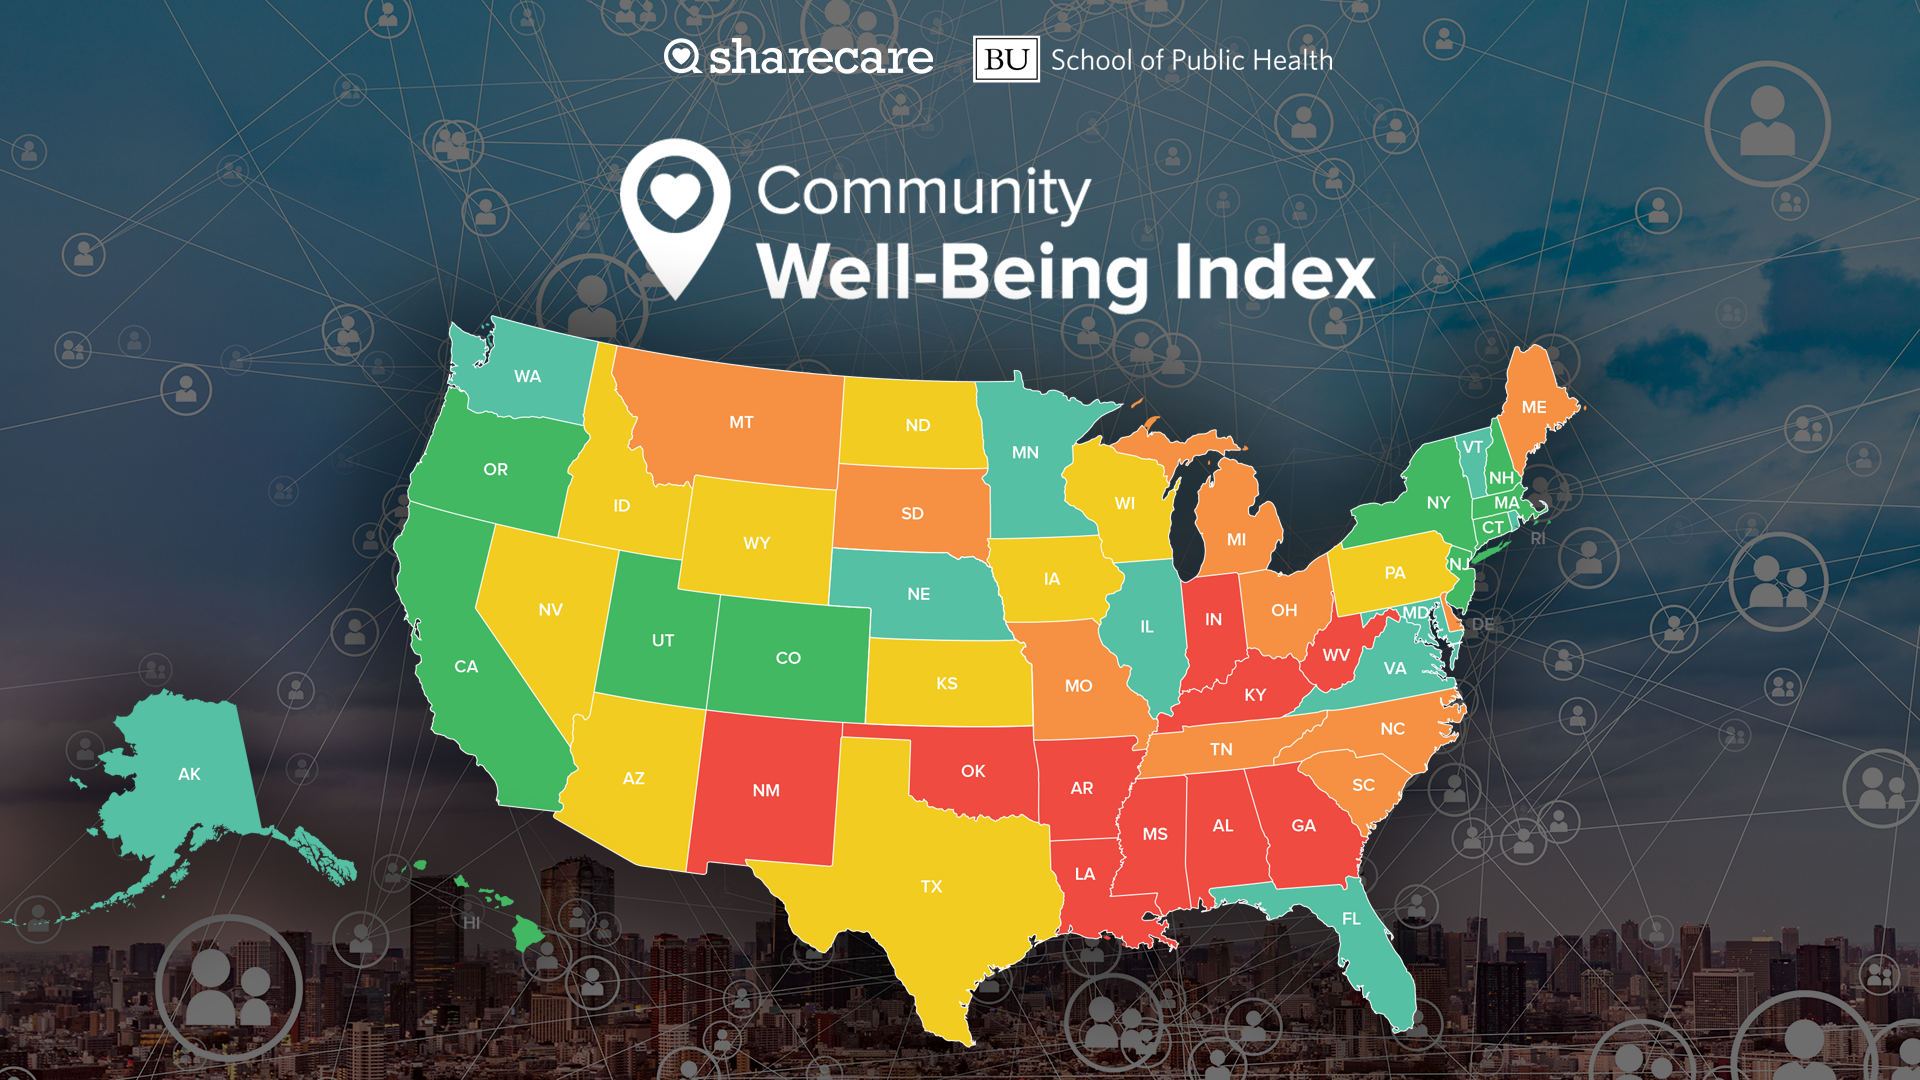 Sharecare Community Well-Being Index 2019 state rankings